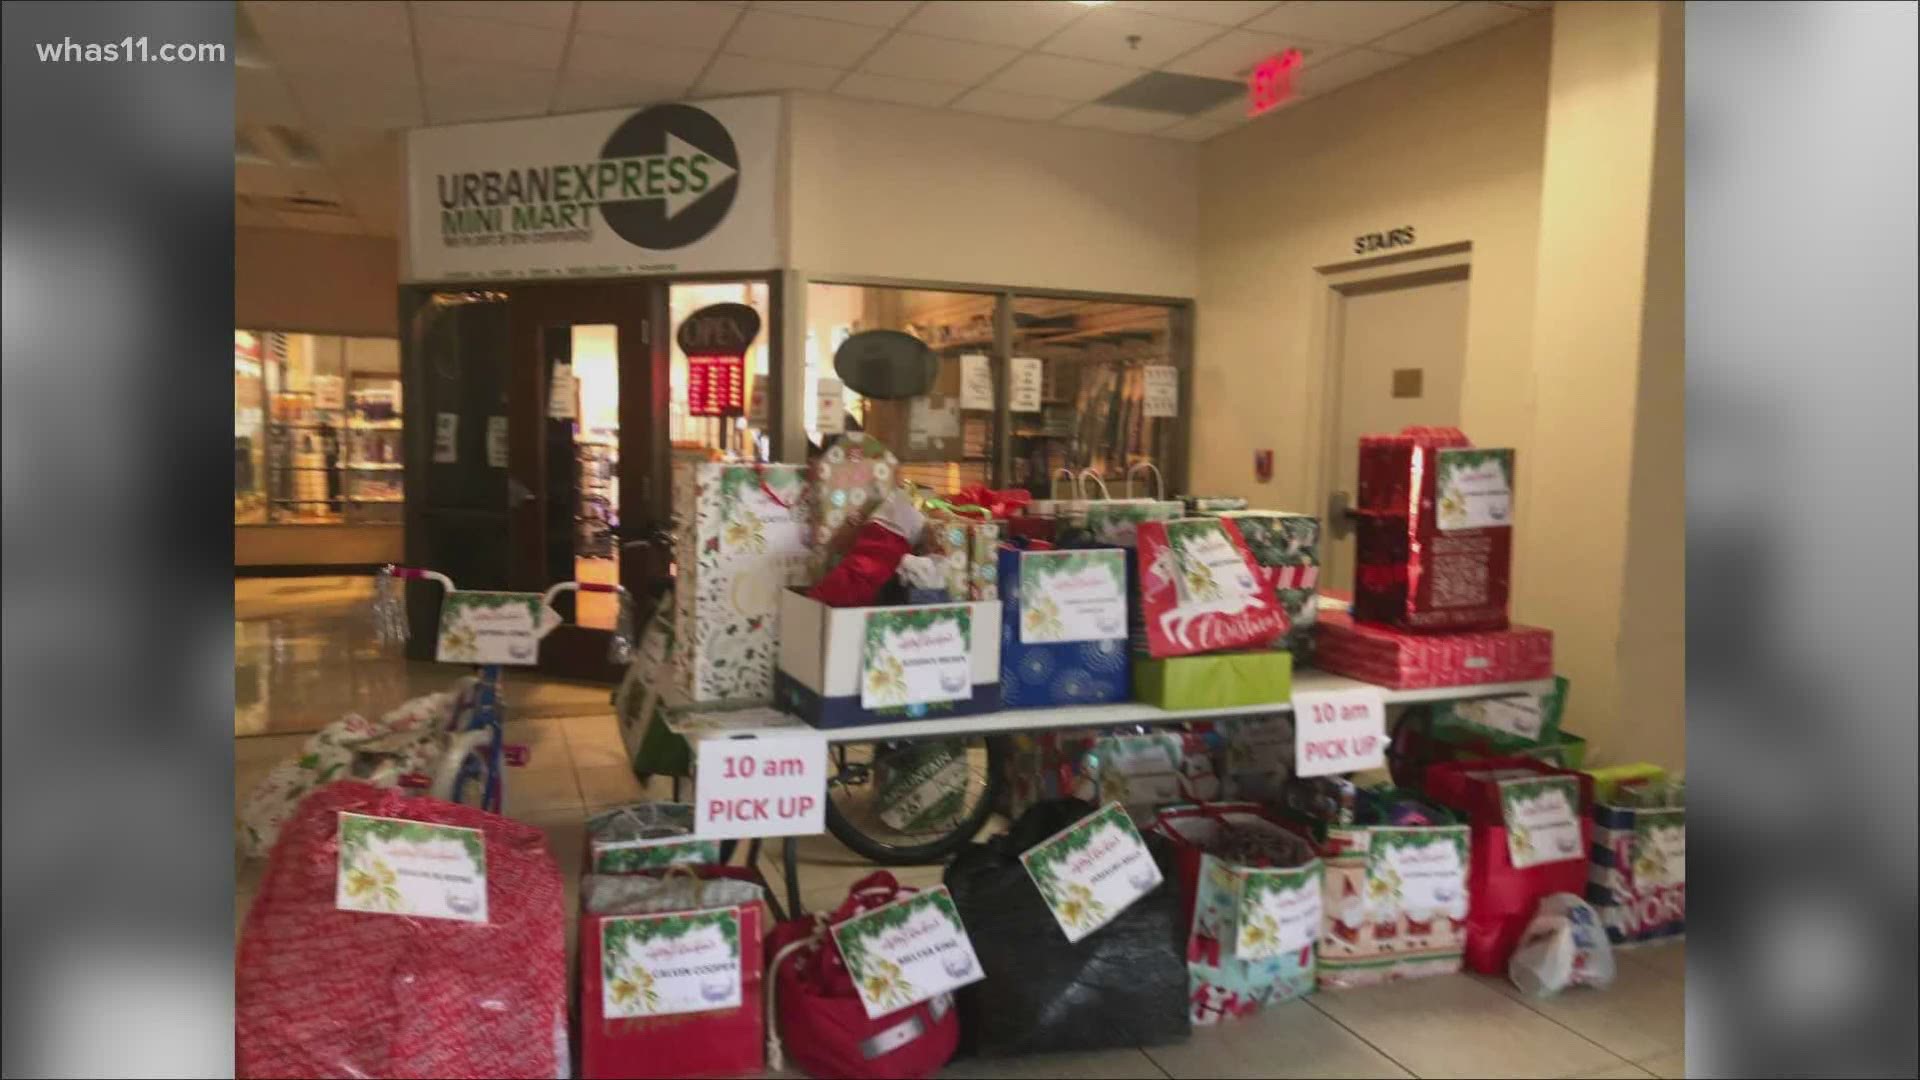 More than 100 families in Kentuckiana received Christmas baskets full of food and household items, thanks to St. Stephen Church and their Family Life Center.